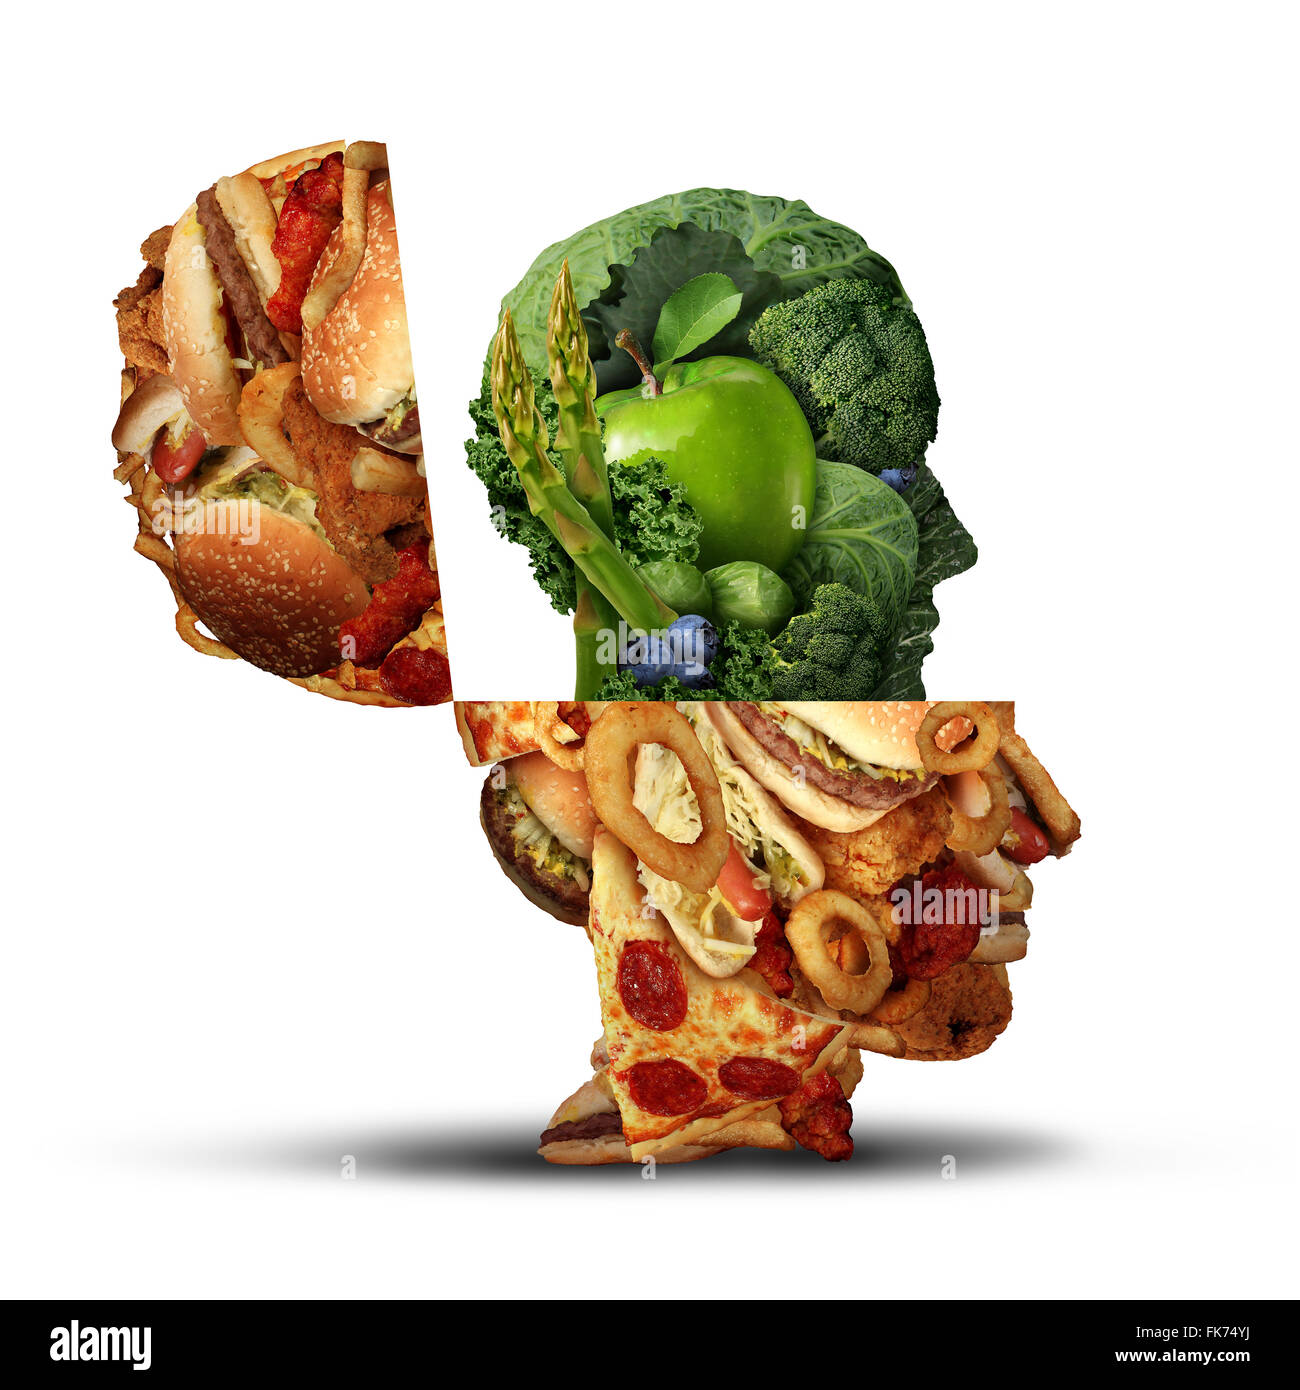 Nutrition change healthy lifestyle concept changing bad eating habits and from unhealthy junk food to fresh fruits and vegetables shaped as an open human head as an icon for the new healthy you. Stock Photo